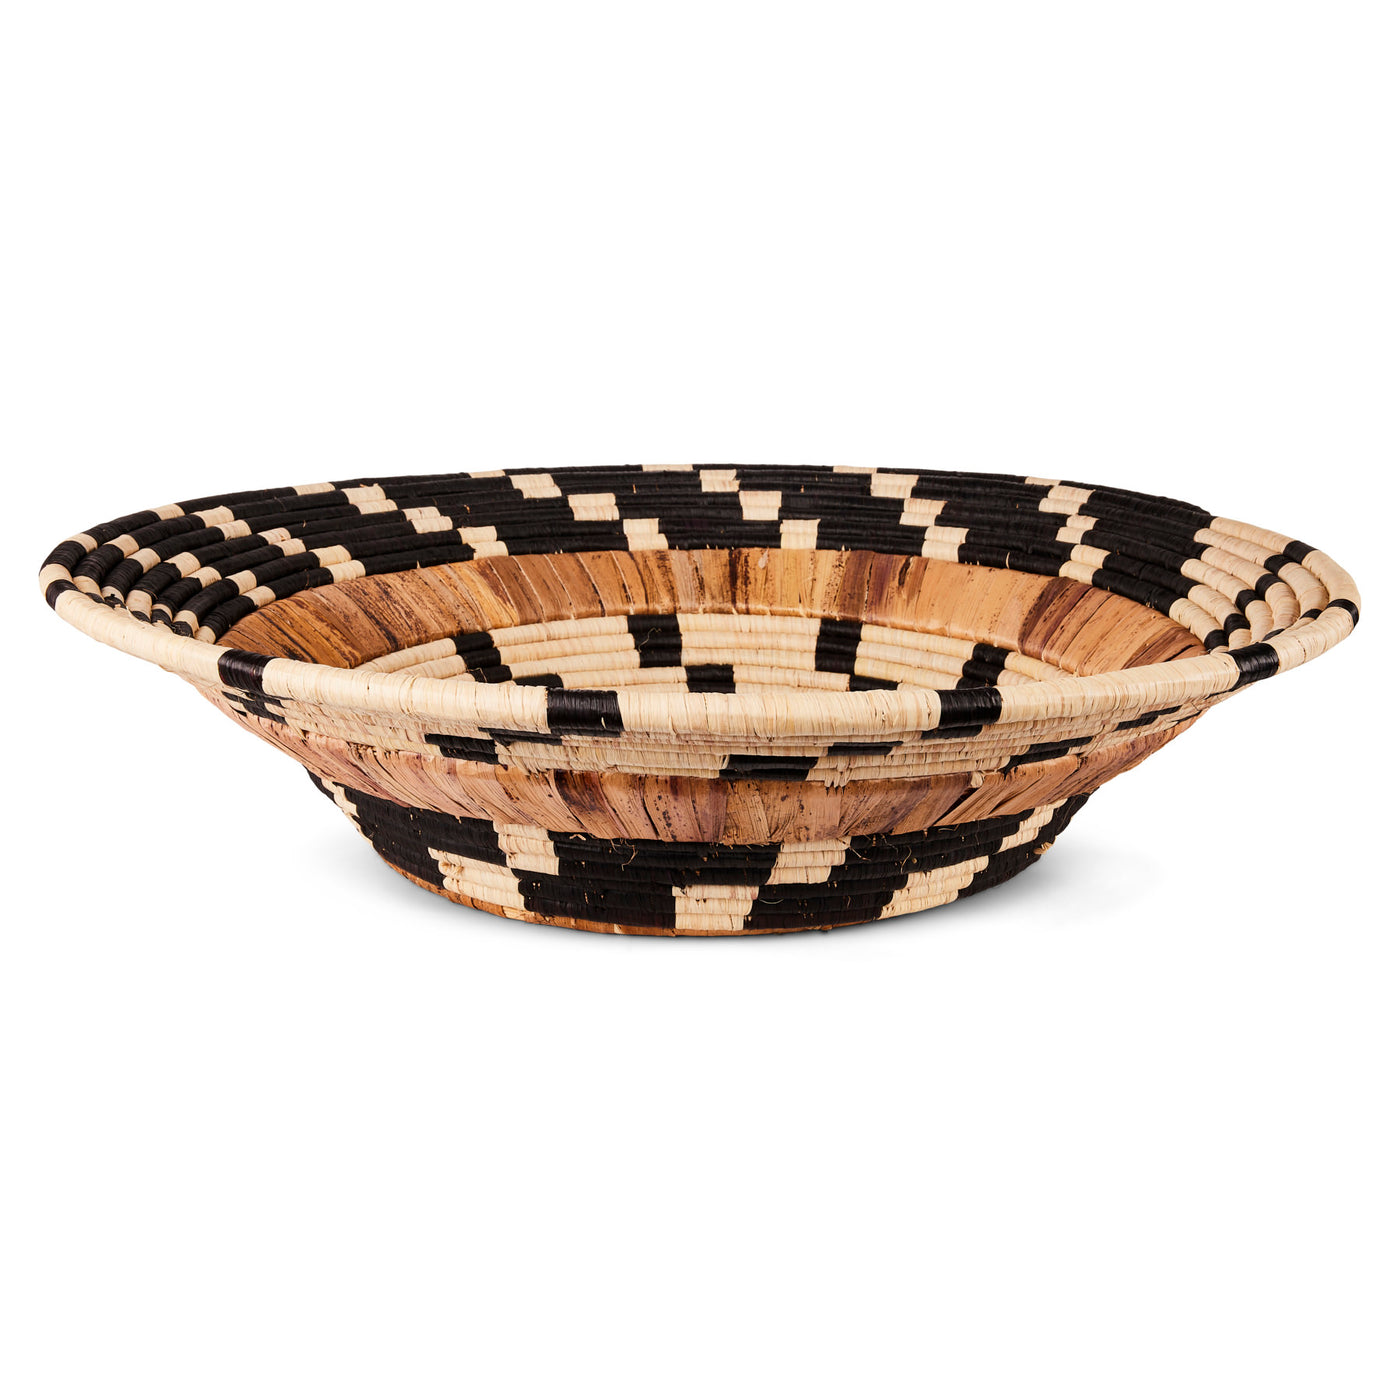 Captivating Contrast - 31" Colossal Statement Bowl